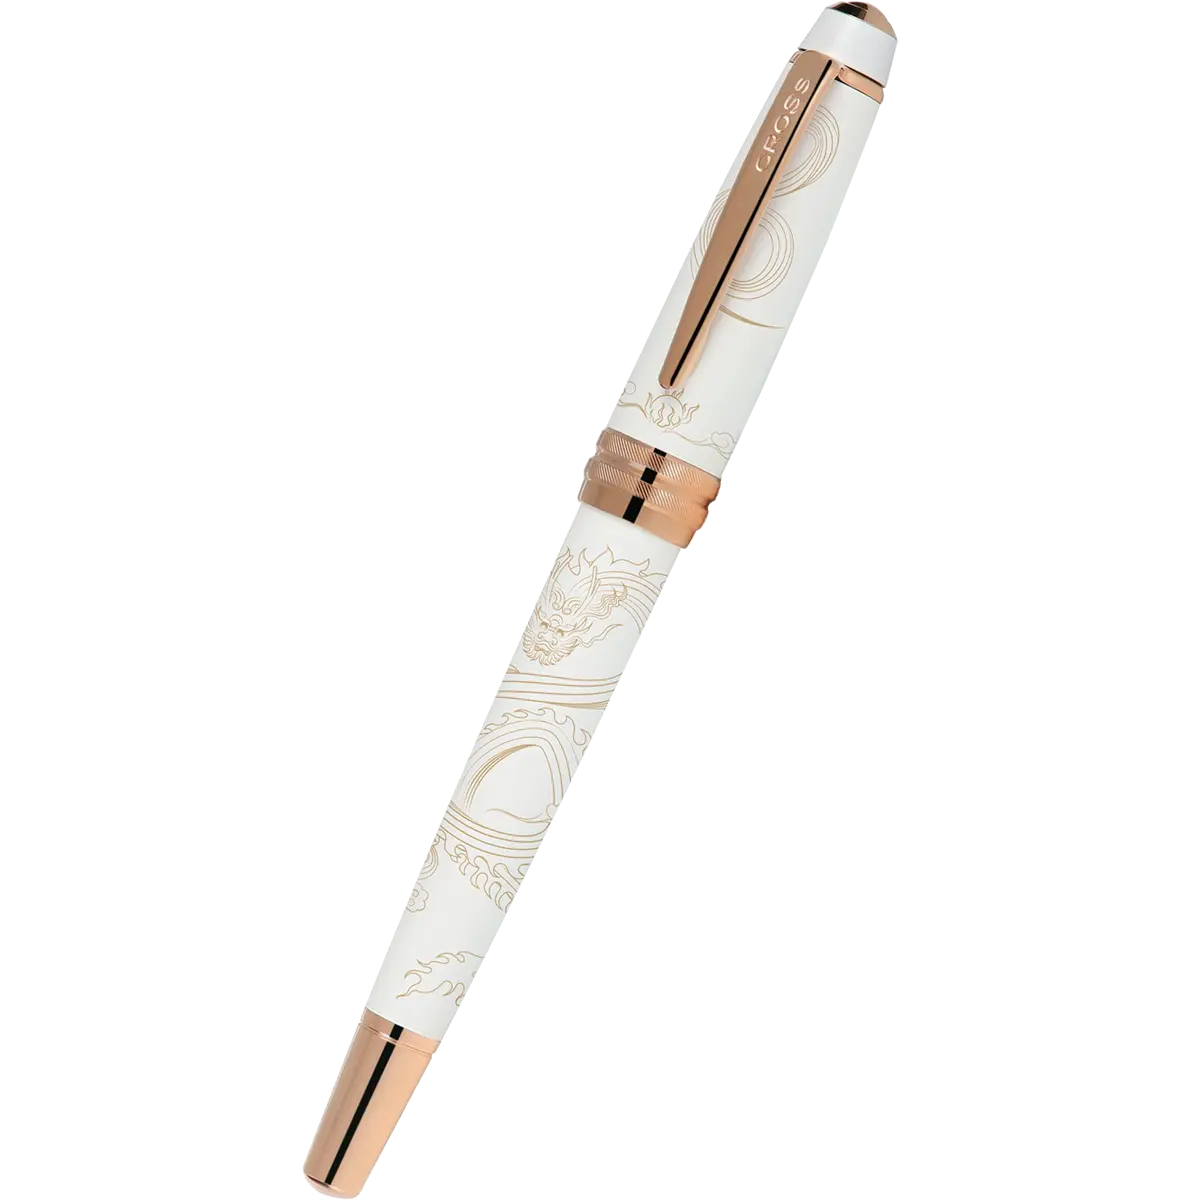 Cross Bailey - Year of the Dragon Pearlescent White Lacquer - Selectip Rollerball Pen - Rose Gold Cross Pens